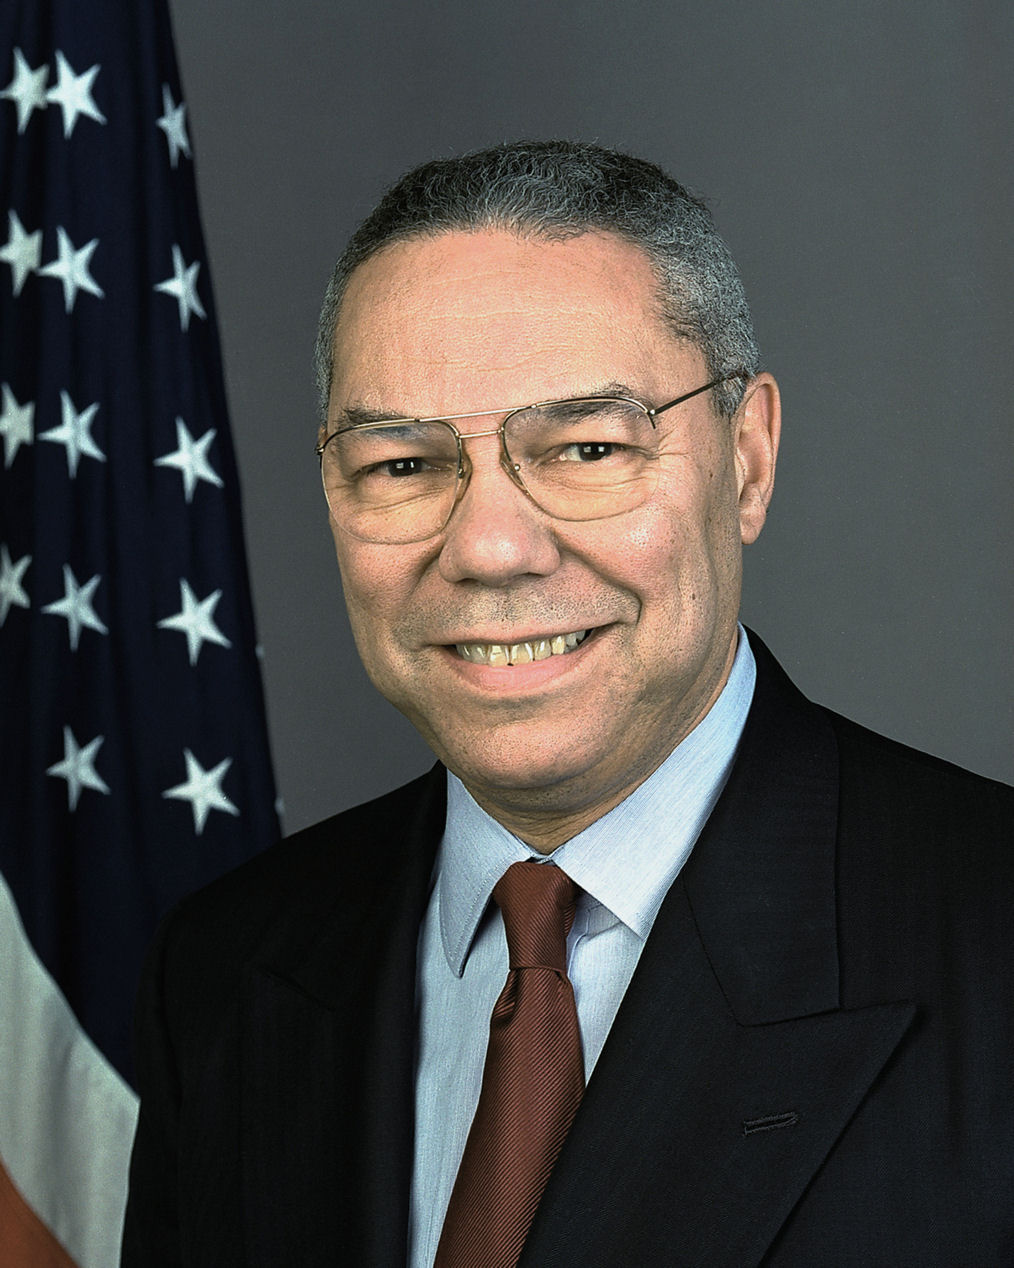 colin_powell_official_secretary_of_state_photo_small.jpg